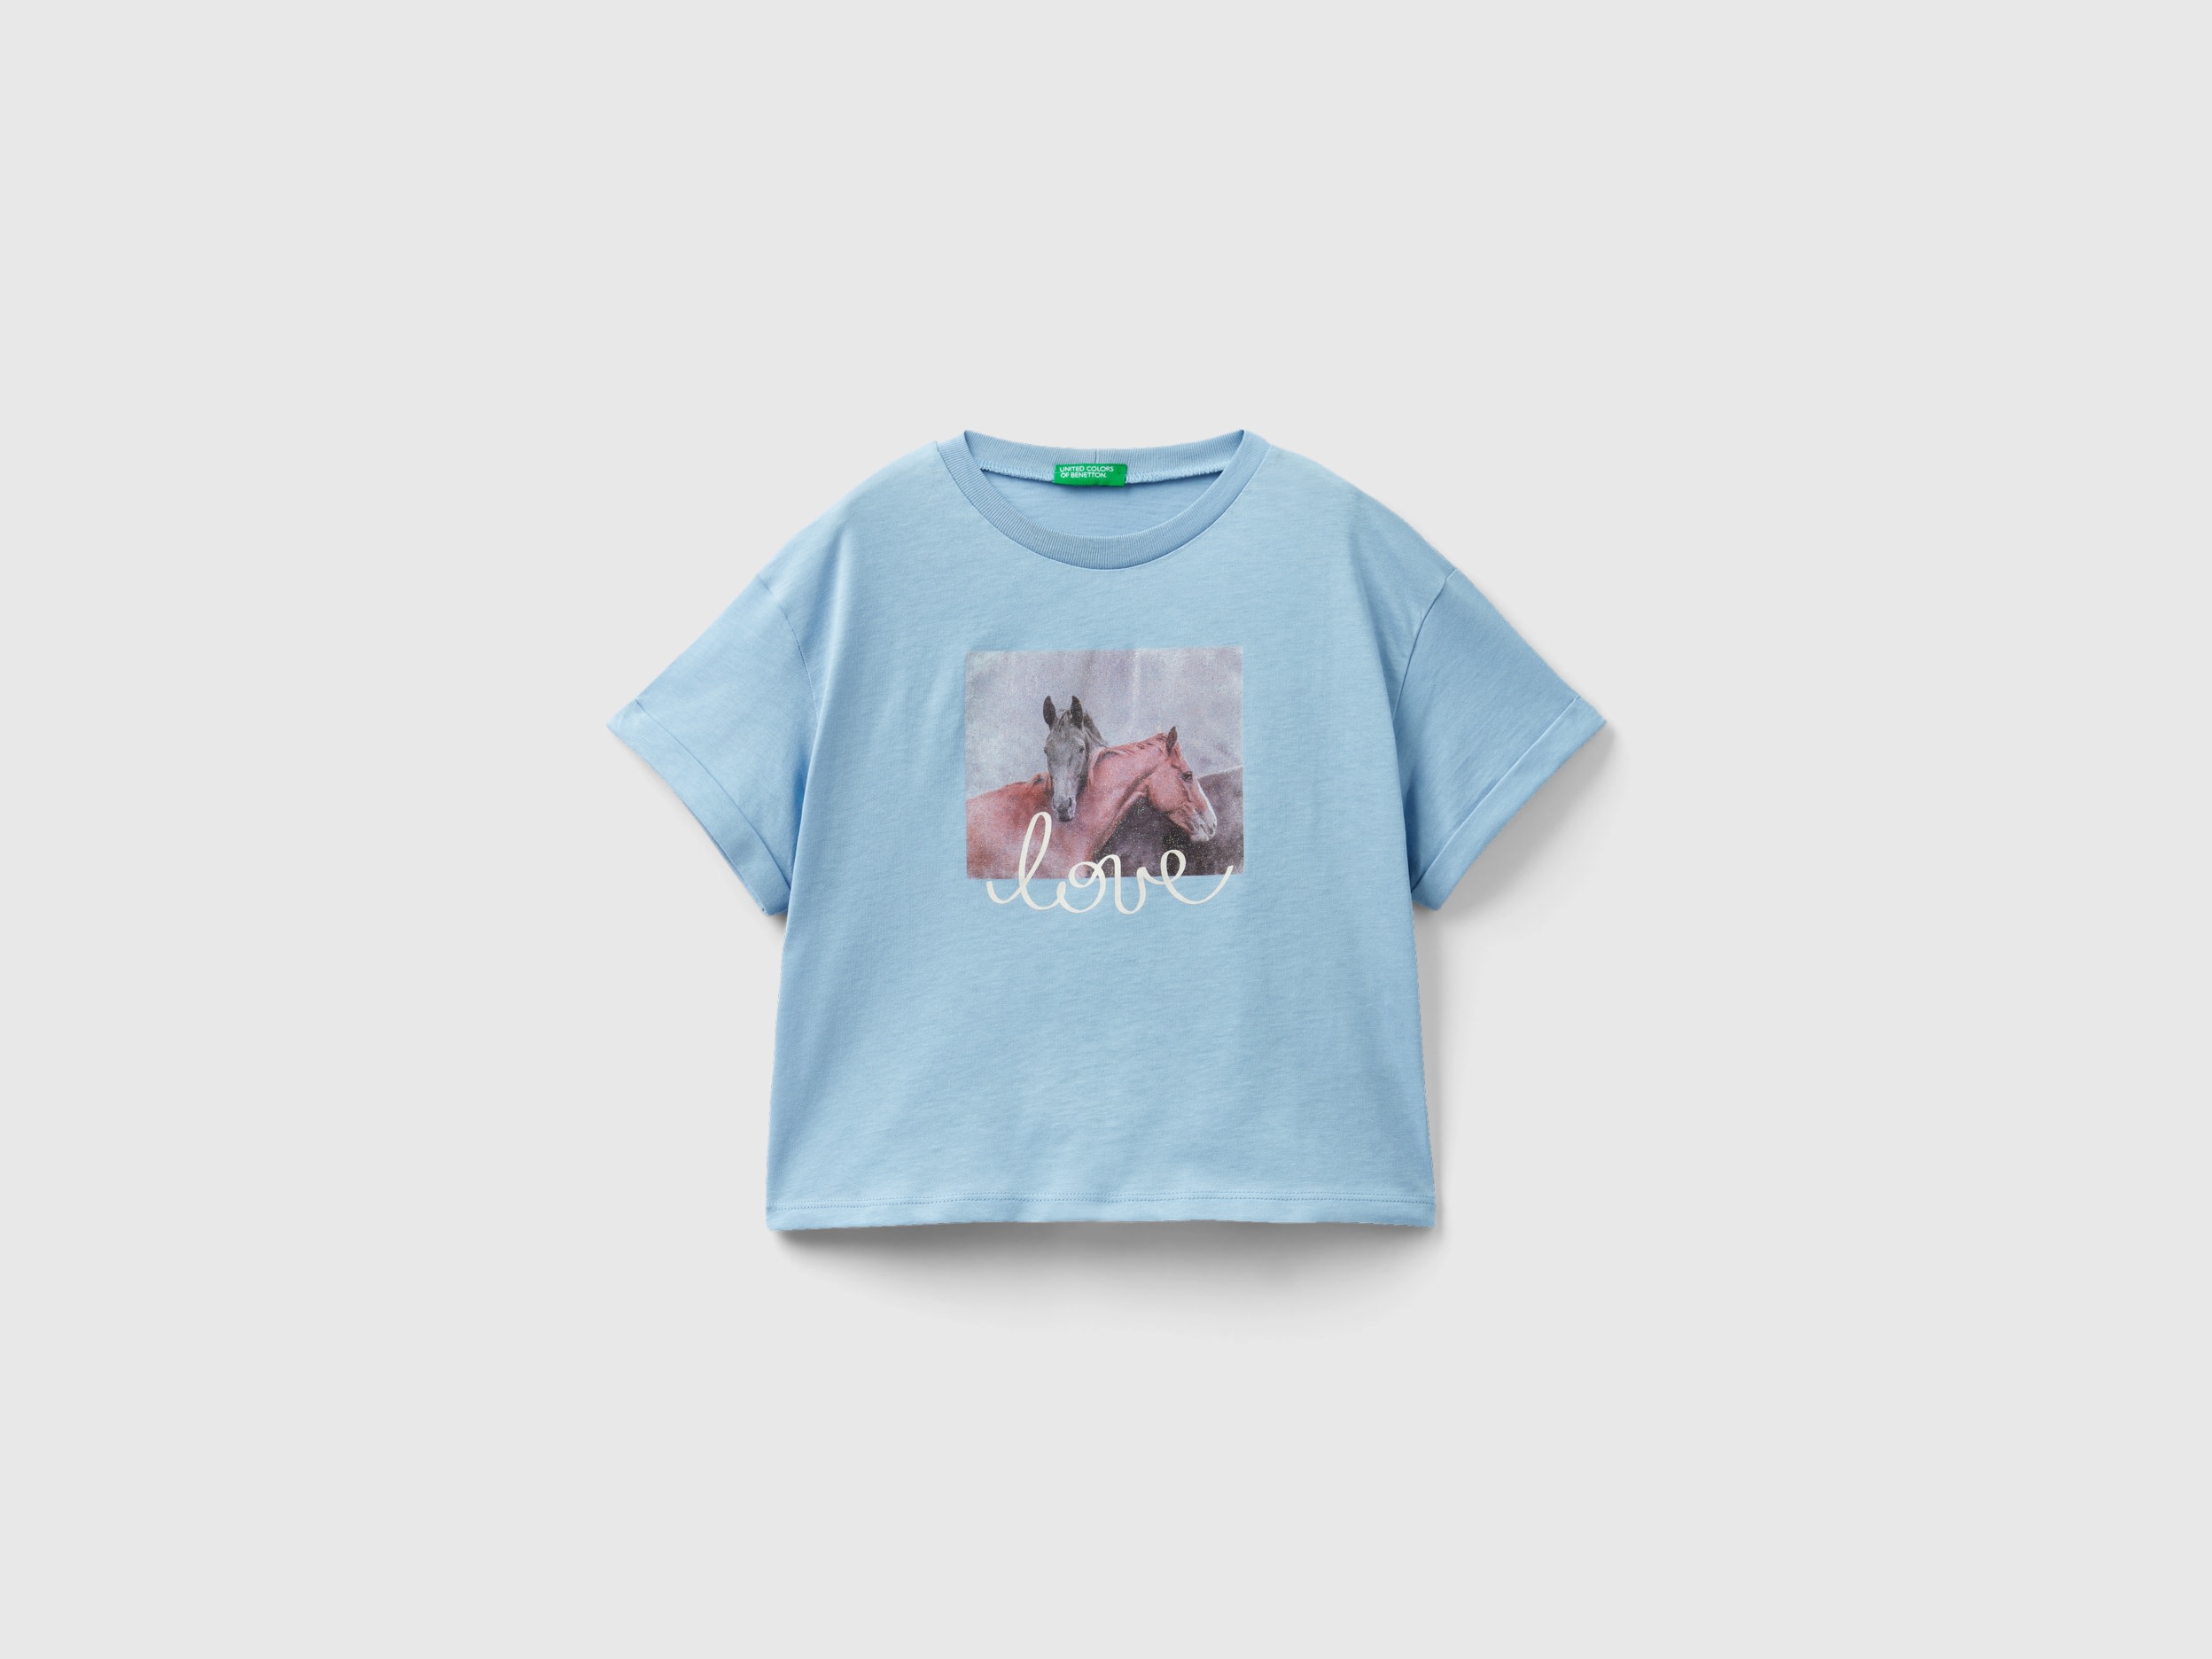 Image of Benetton, T-shirt With Photographic Horse Print, size M, Sky Blue, Kids